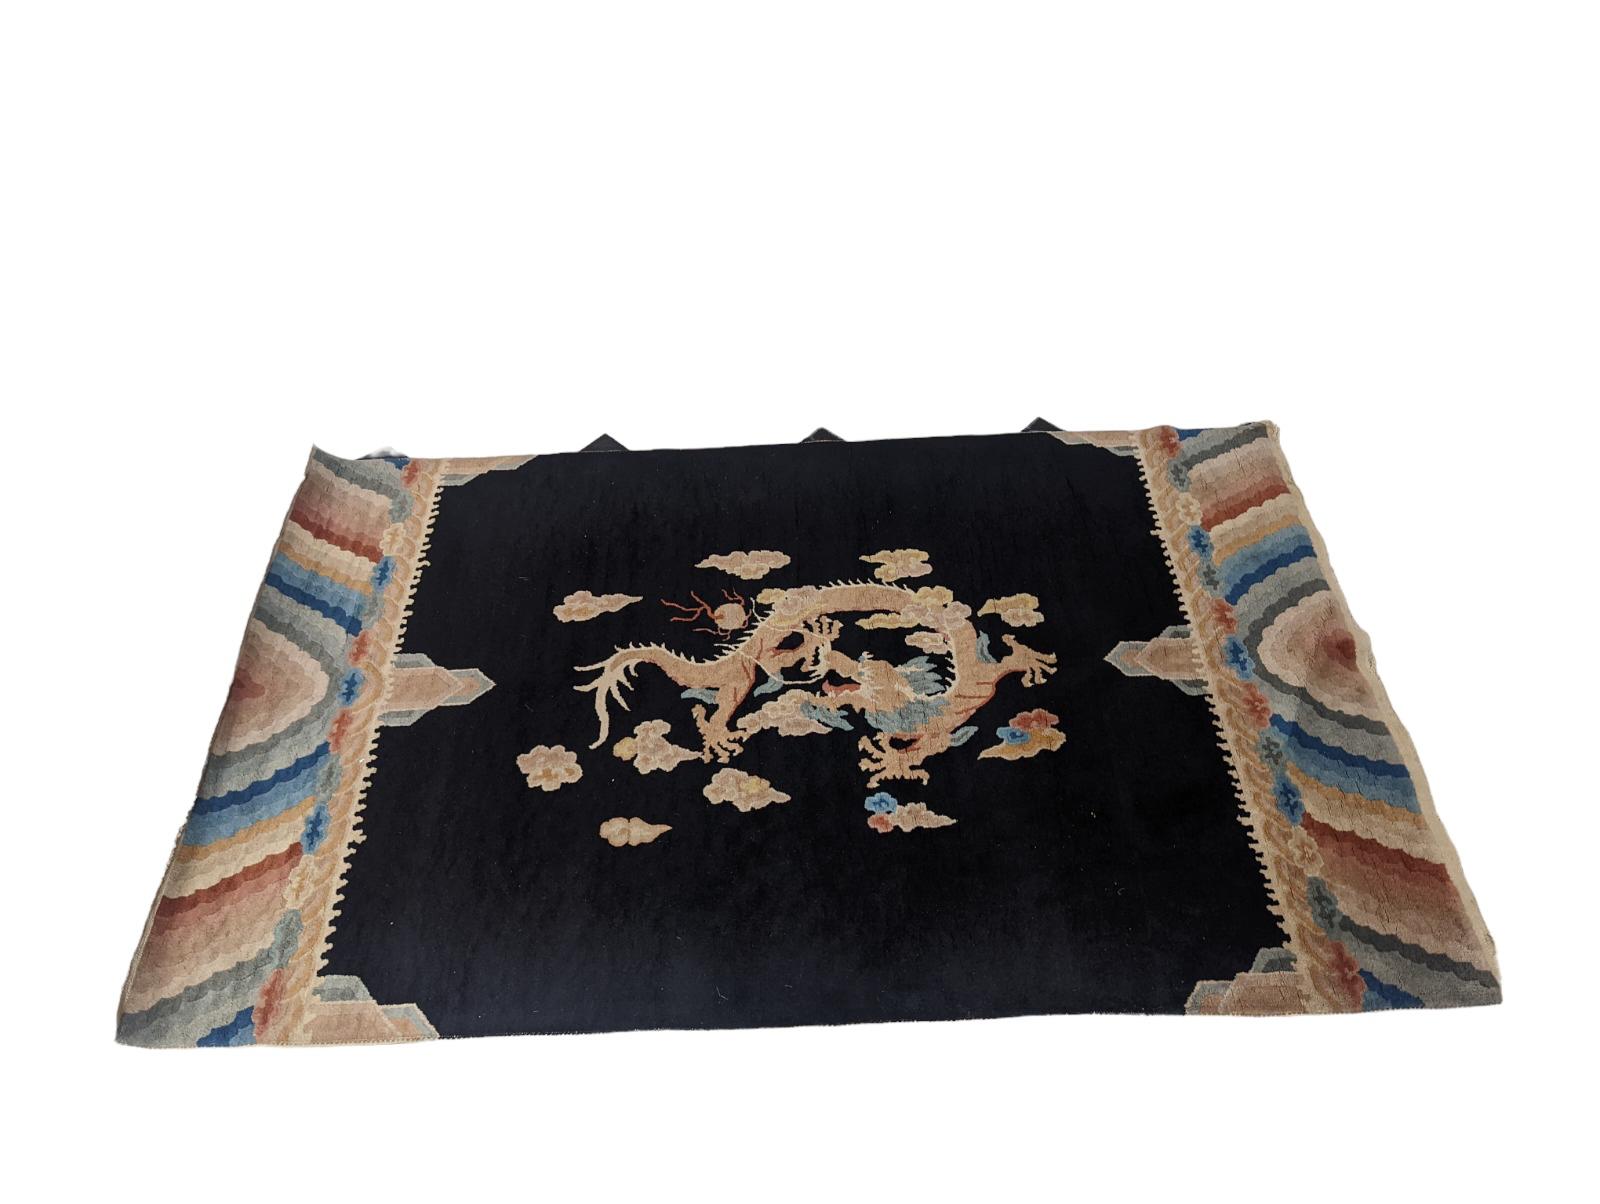 WITHDRAWN UNTIL THE 28TH OF MAY CHINESE CIRCA 1880, WOOL PILE, COTTON FOUNDATION CARPET/RUG. (210